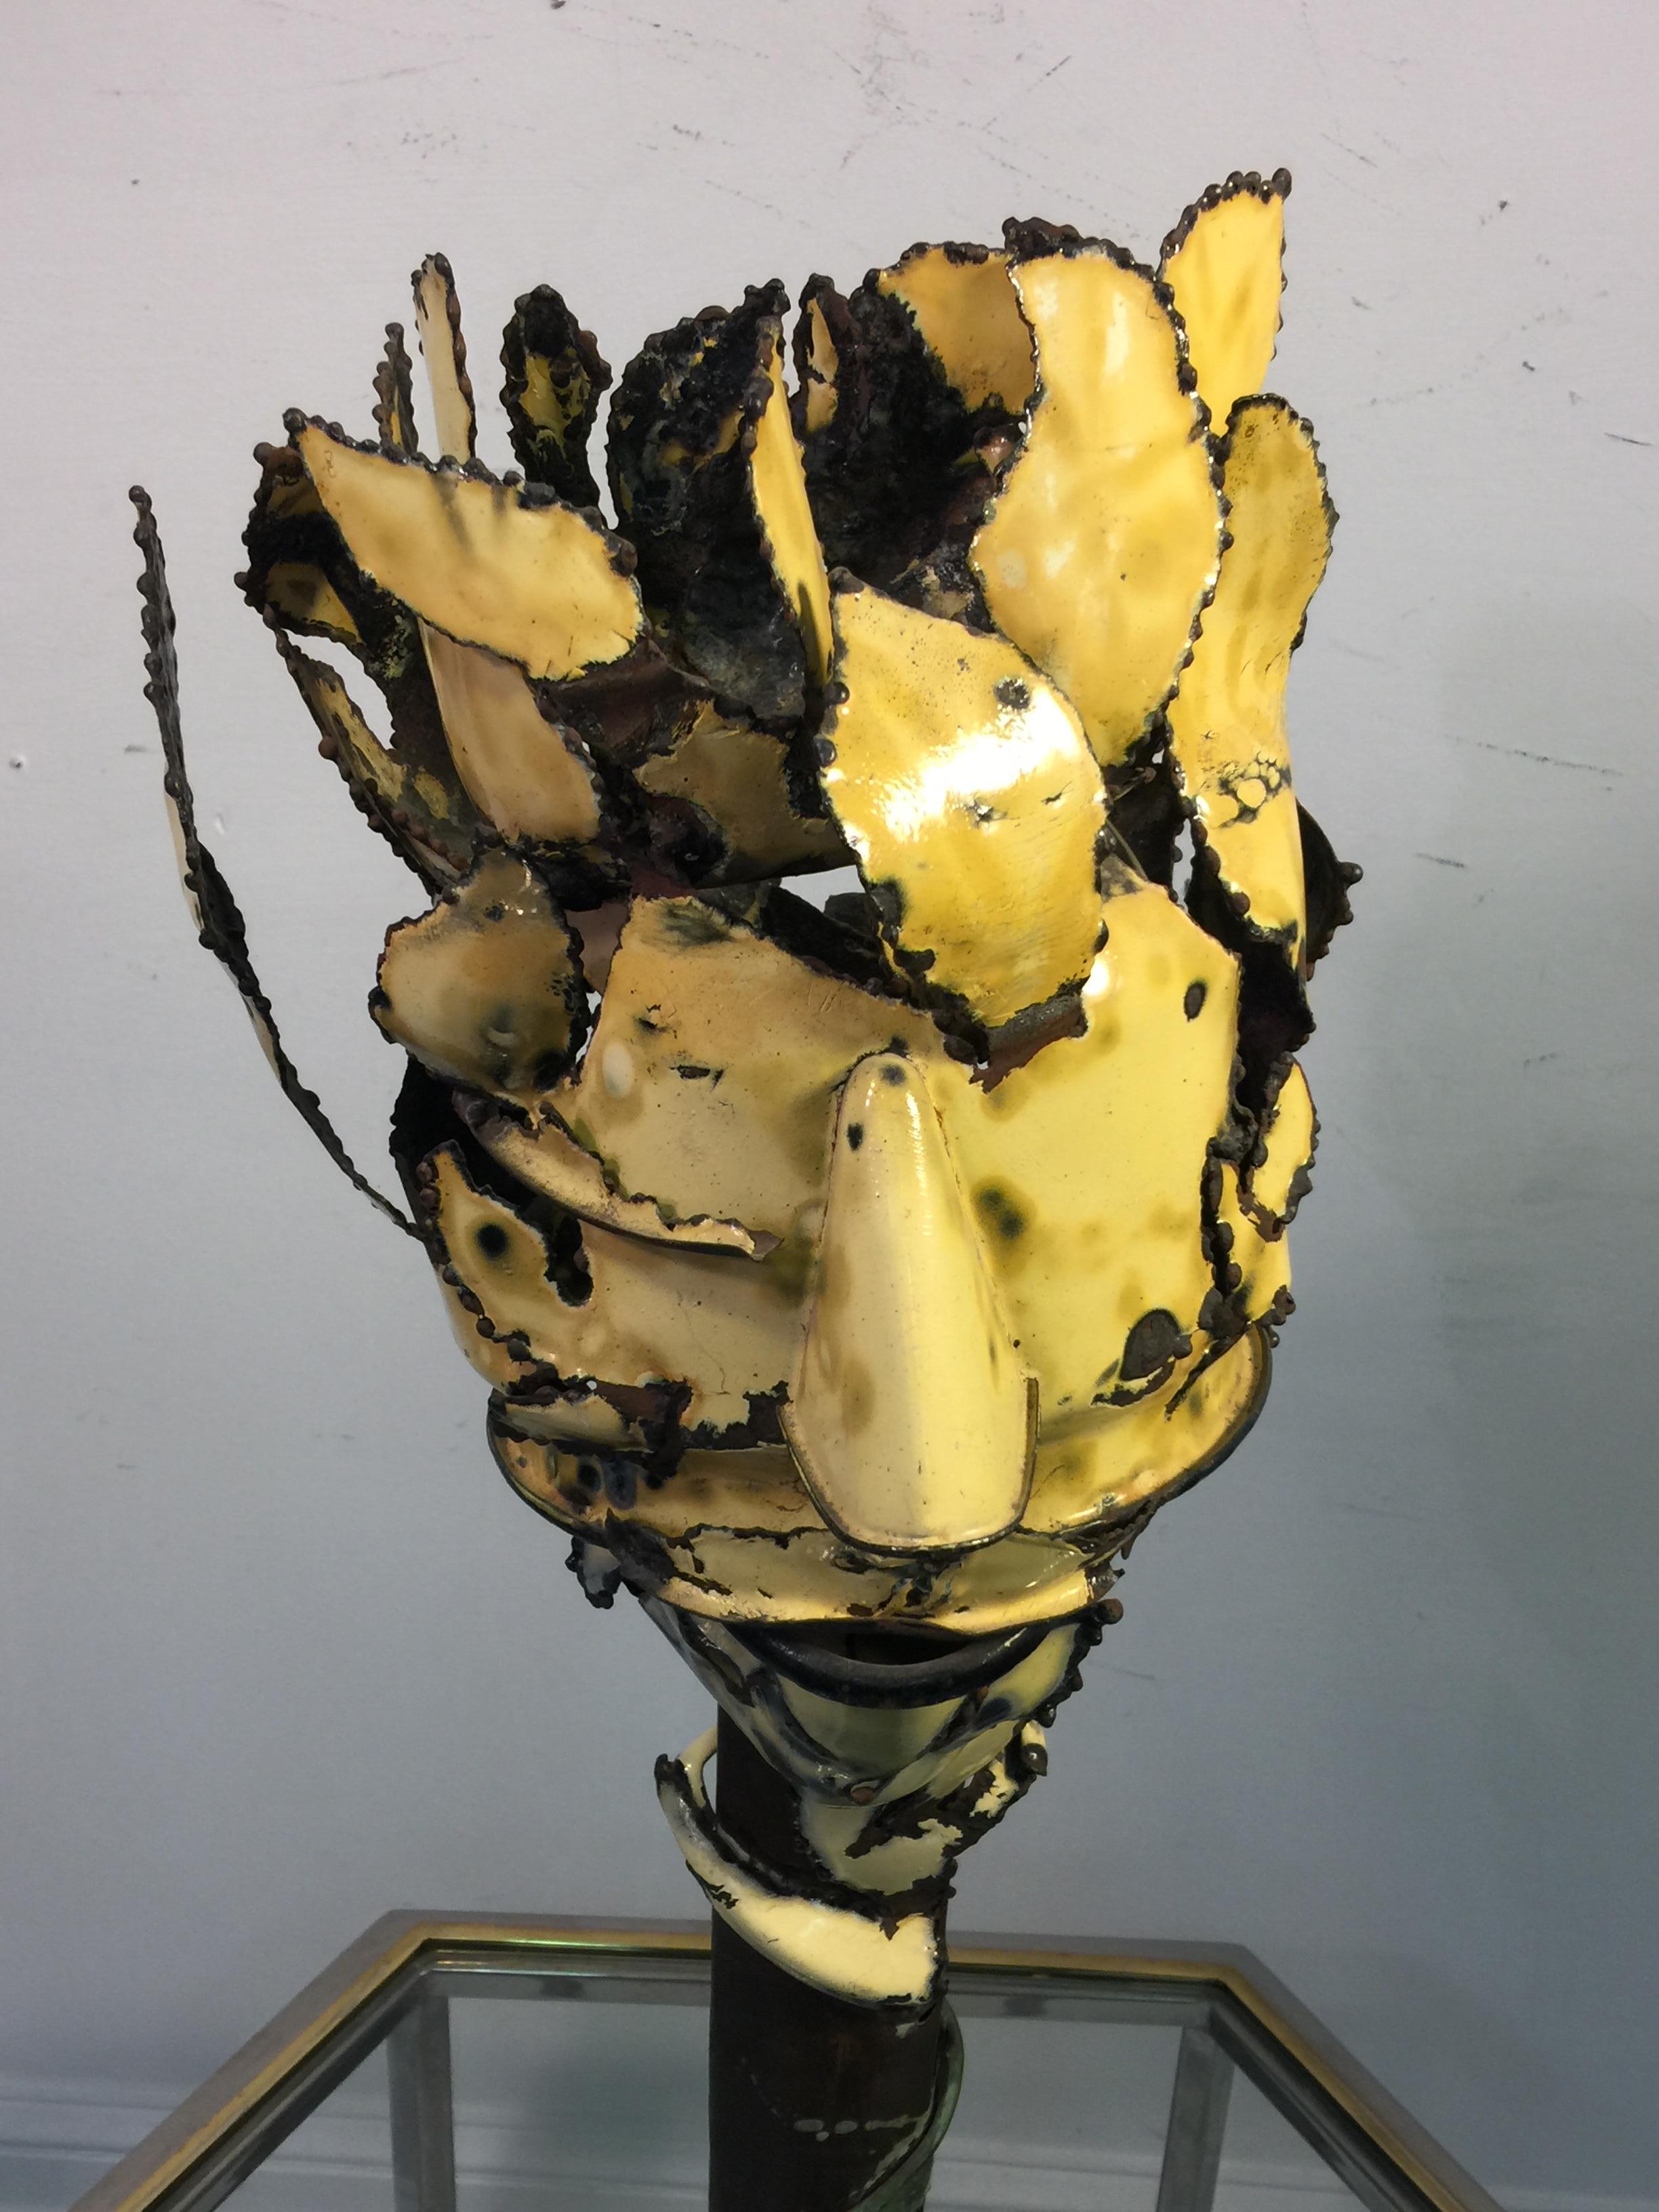 Surrealist flower head sculpture formed with the petals creating a three dimensional head. Hand-sculpted of copper with yellow enamel and vedrigris patination. Signed Pantala and dated 1994.The round base measures at 7 1/2